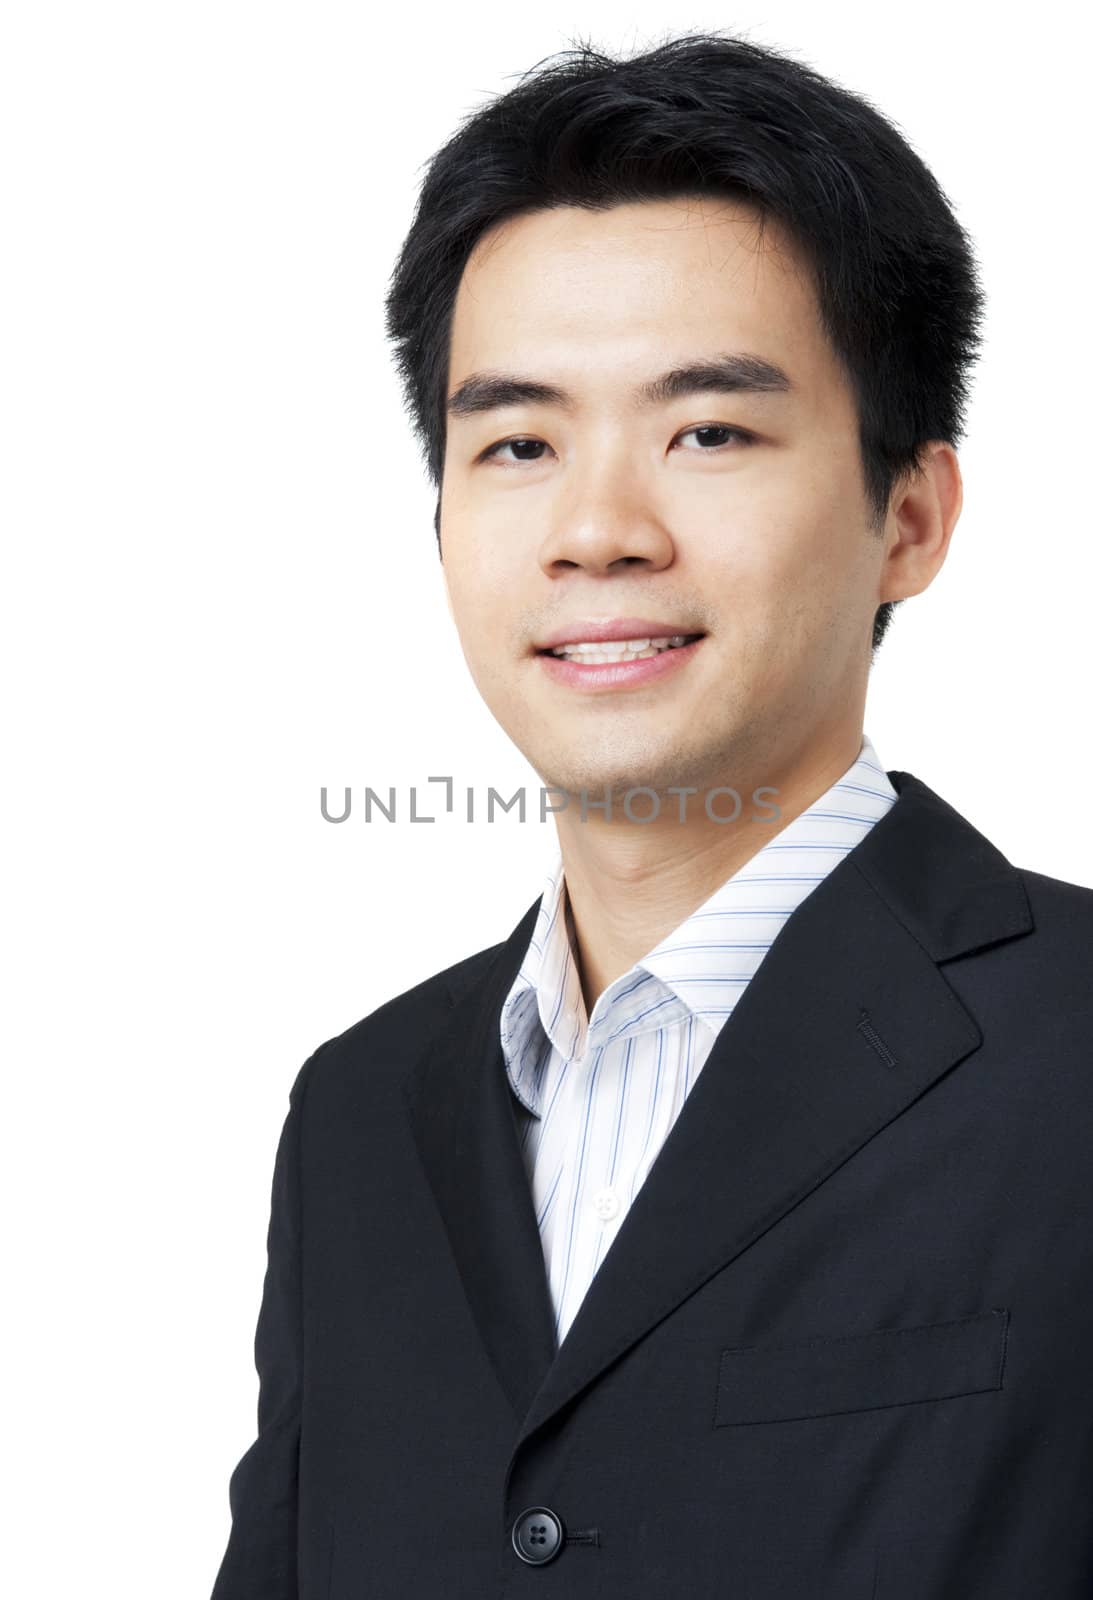 Portrait of young Asian executive in black suit